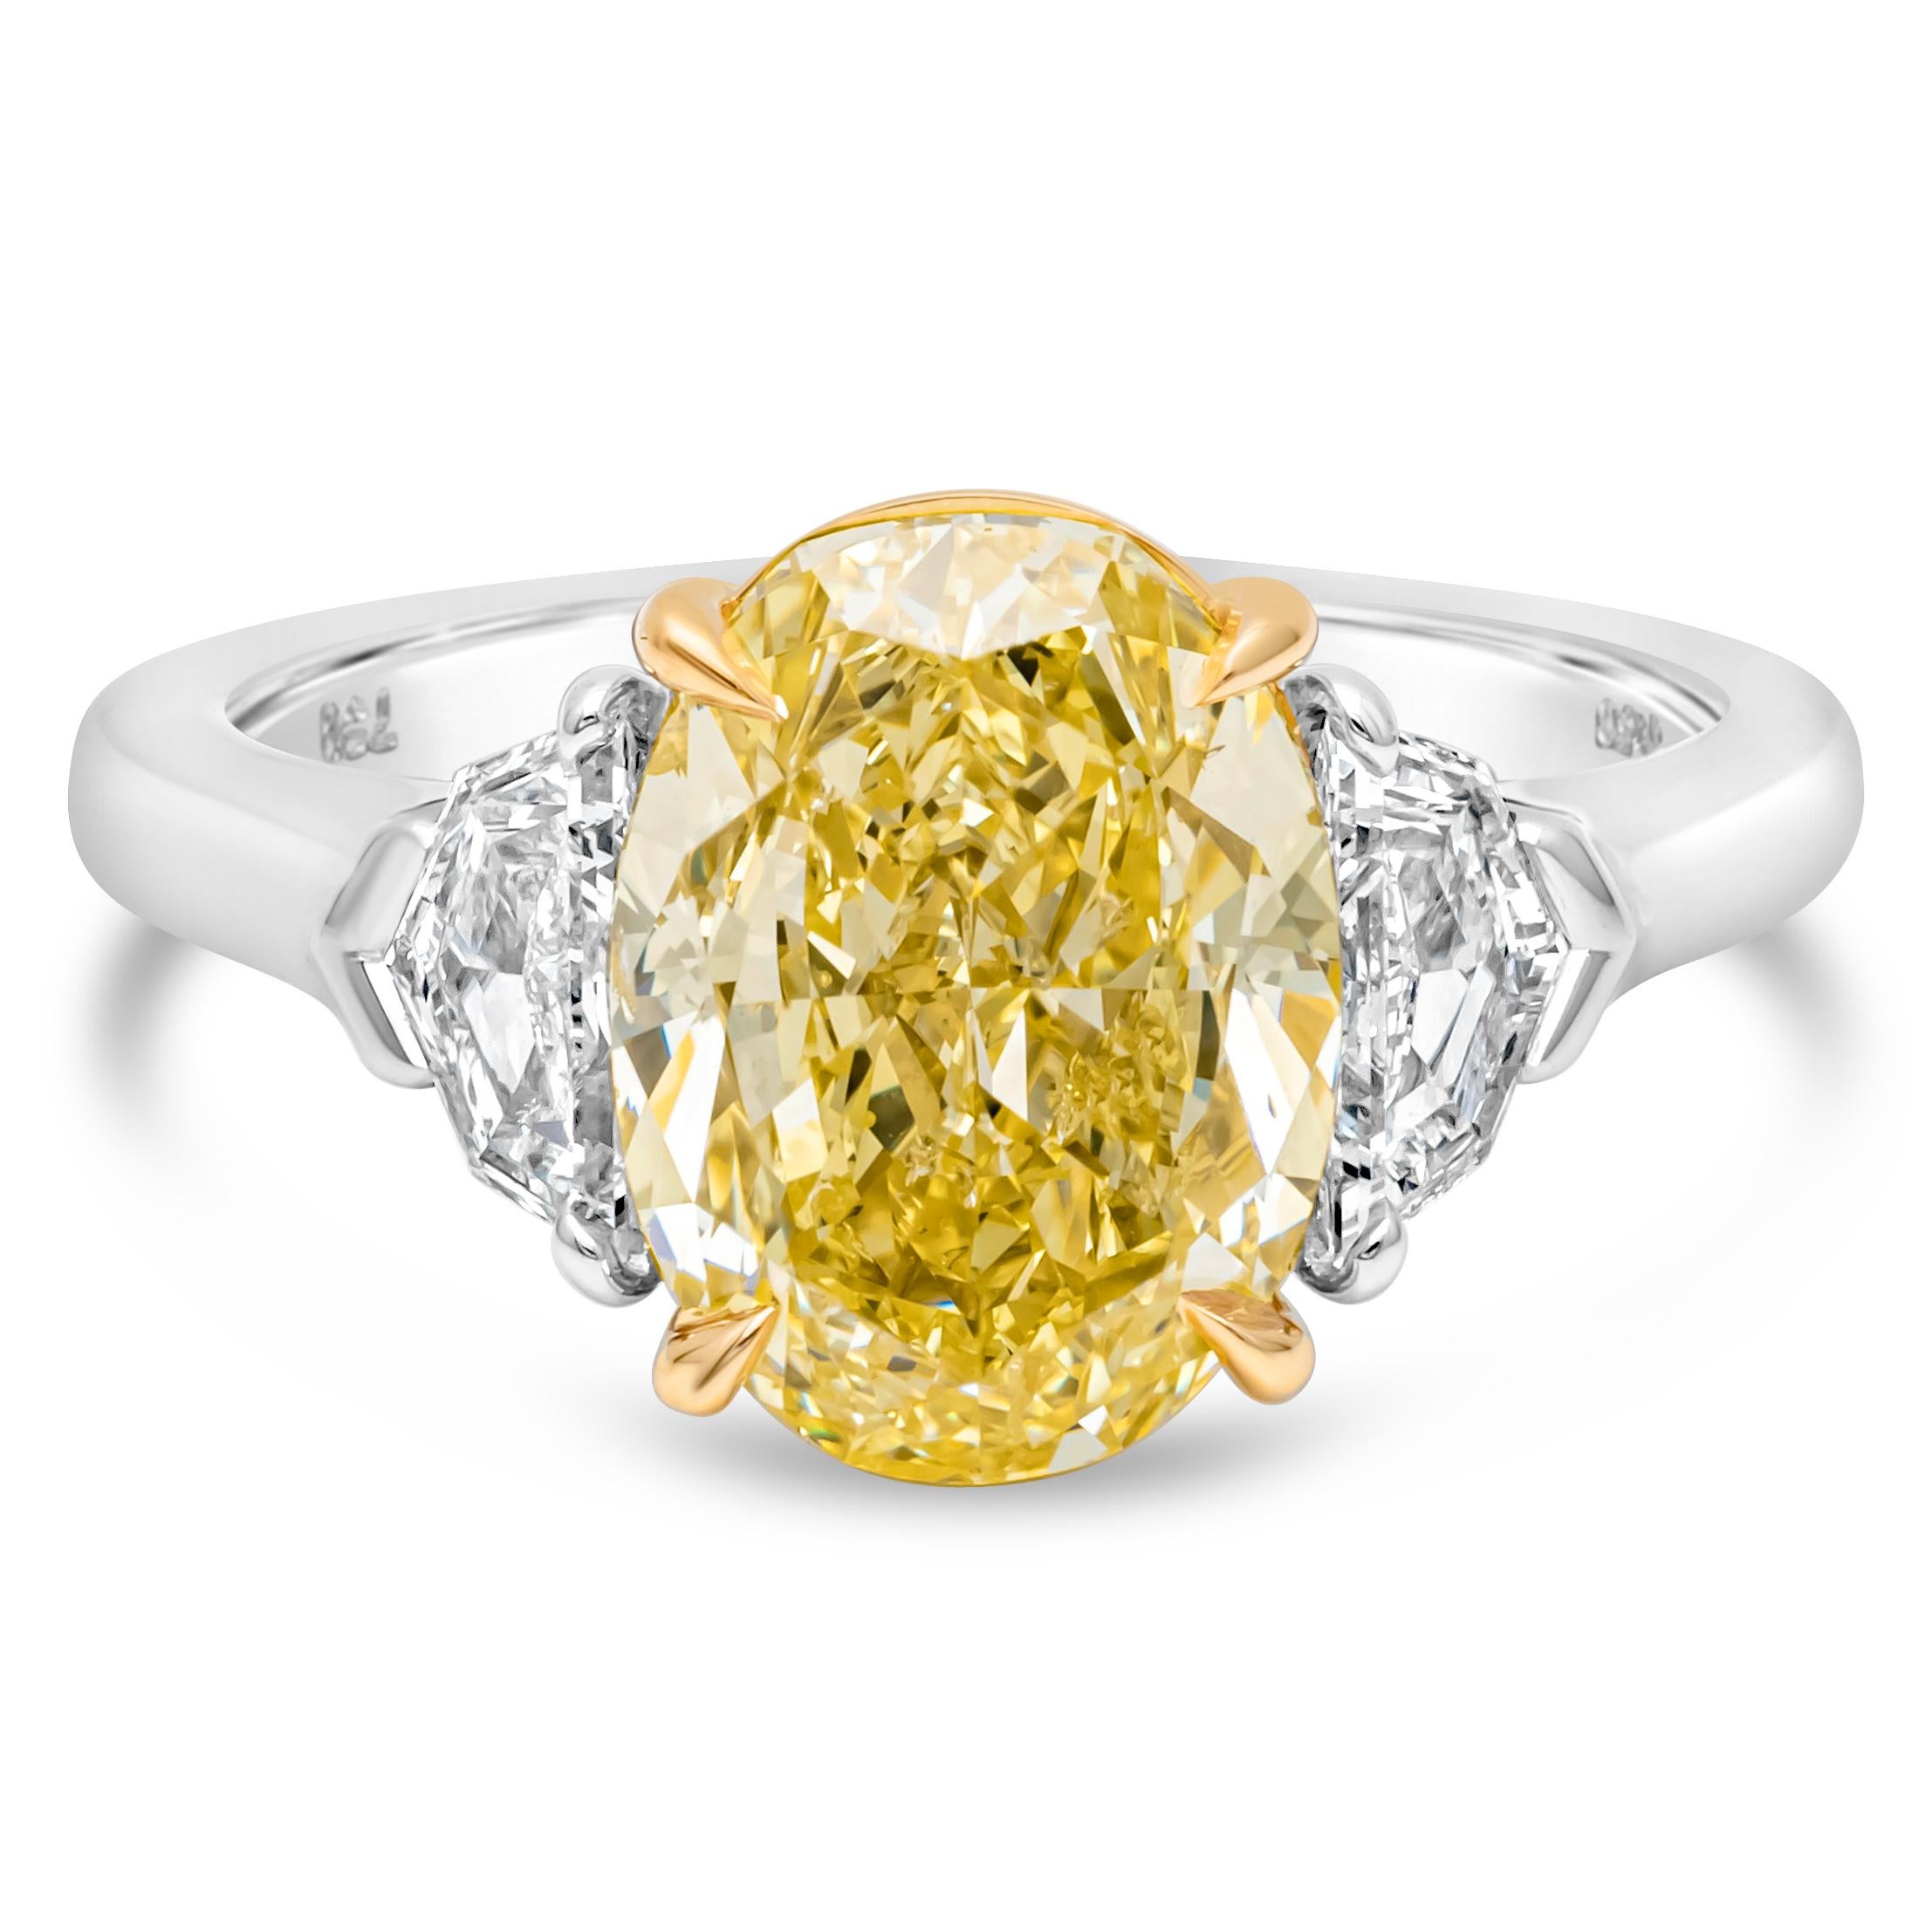 This wonderful and classy three stone engagement ring showcasing a GIA certified 4.12 carats oval cut color-rich fancy intense yellow diamond in the center, set in a four prong basket setting. Flanked by diamonds on each side weighing 0.60 carat